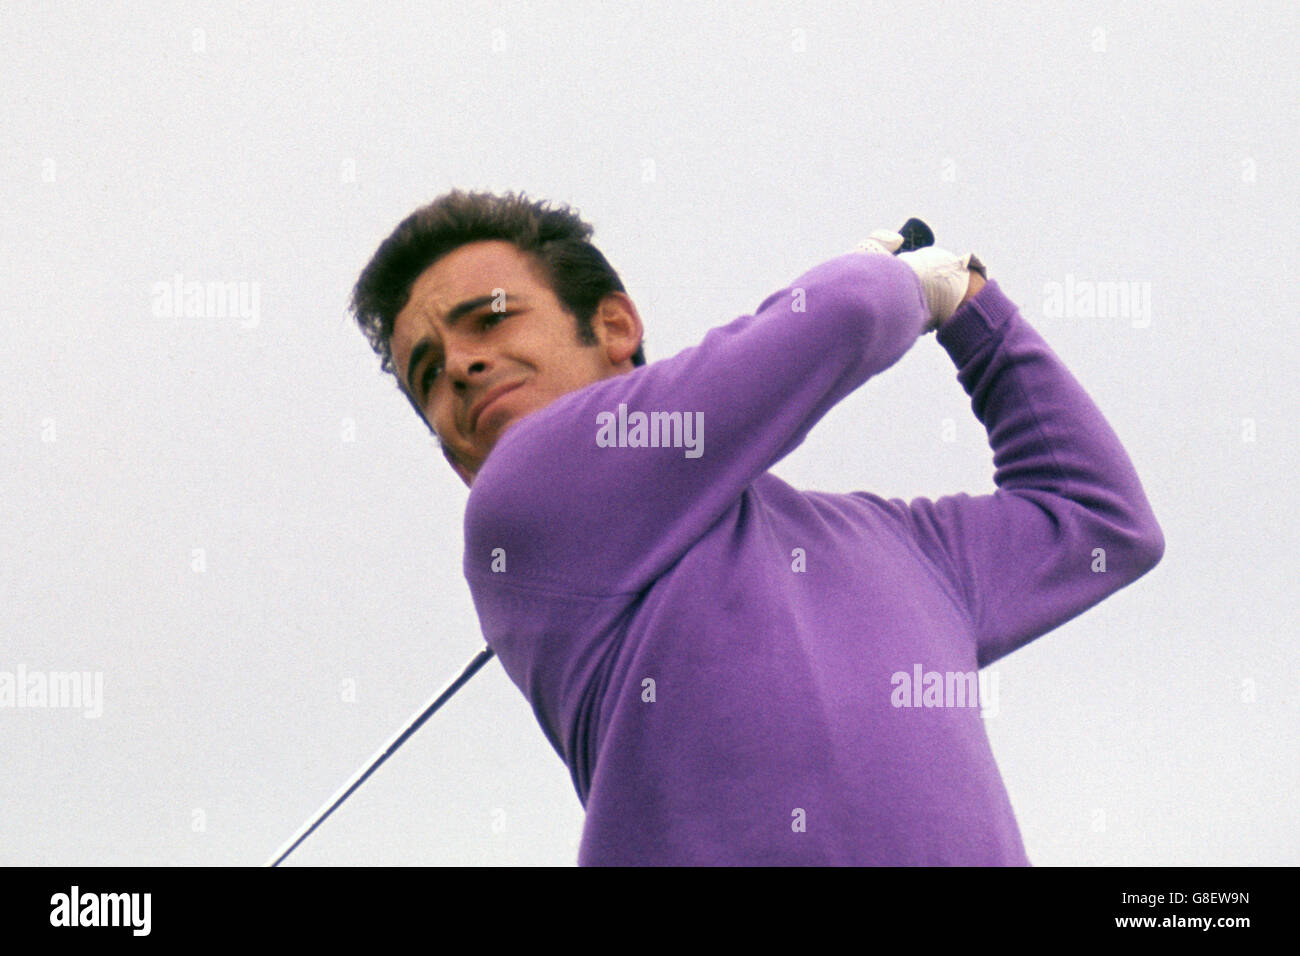 Englishman Tony Jacklin pictured during 1969 Open Championship at Royal Lytham and St Annes Golf Club, which he would go on to win. Stock Photo